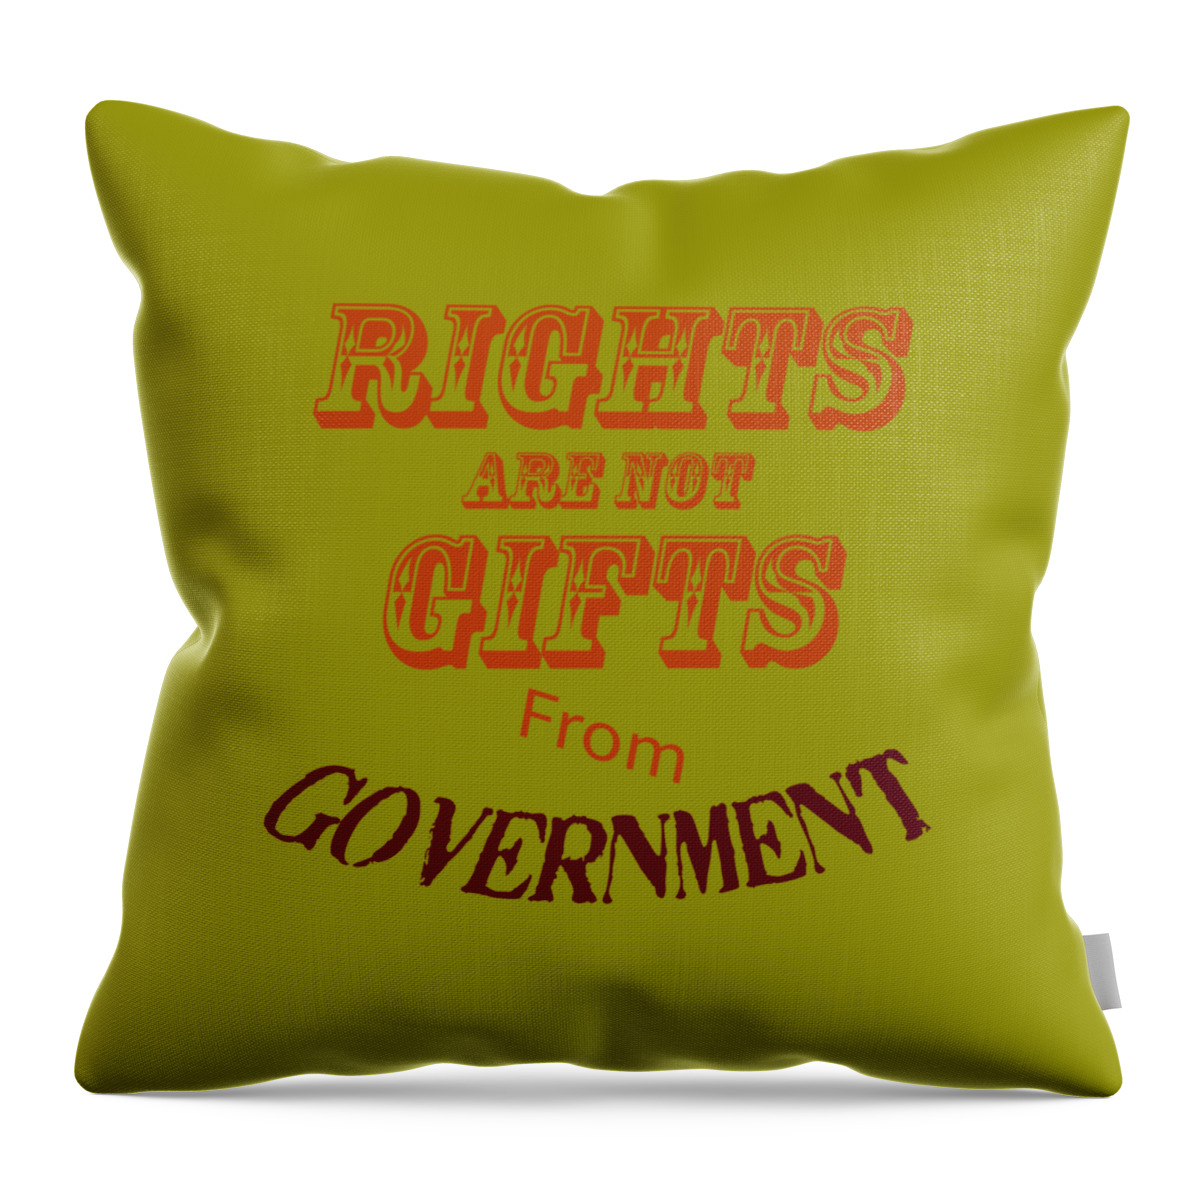 Inspirational Sayings; Life Quotes; Wise Sayings; Quotes And Sayings; People; Funky T Shirts; Struggle; Funny Sayings; T Shirt Saying; Funny Math Saying; Fun Shirts; Novelty Shirts Throw Pillow featuring the photograph Rights Aae NOT Gifts From Government 2004 by M K Miller